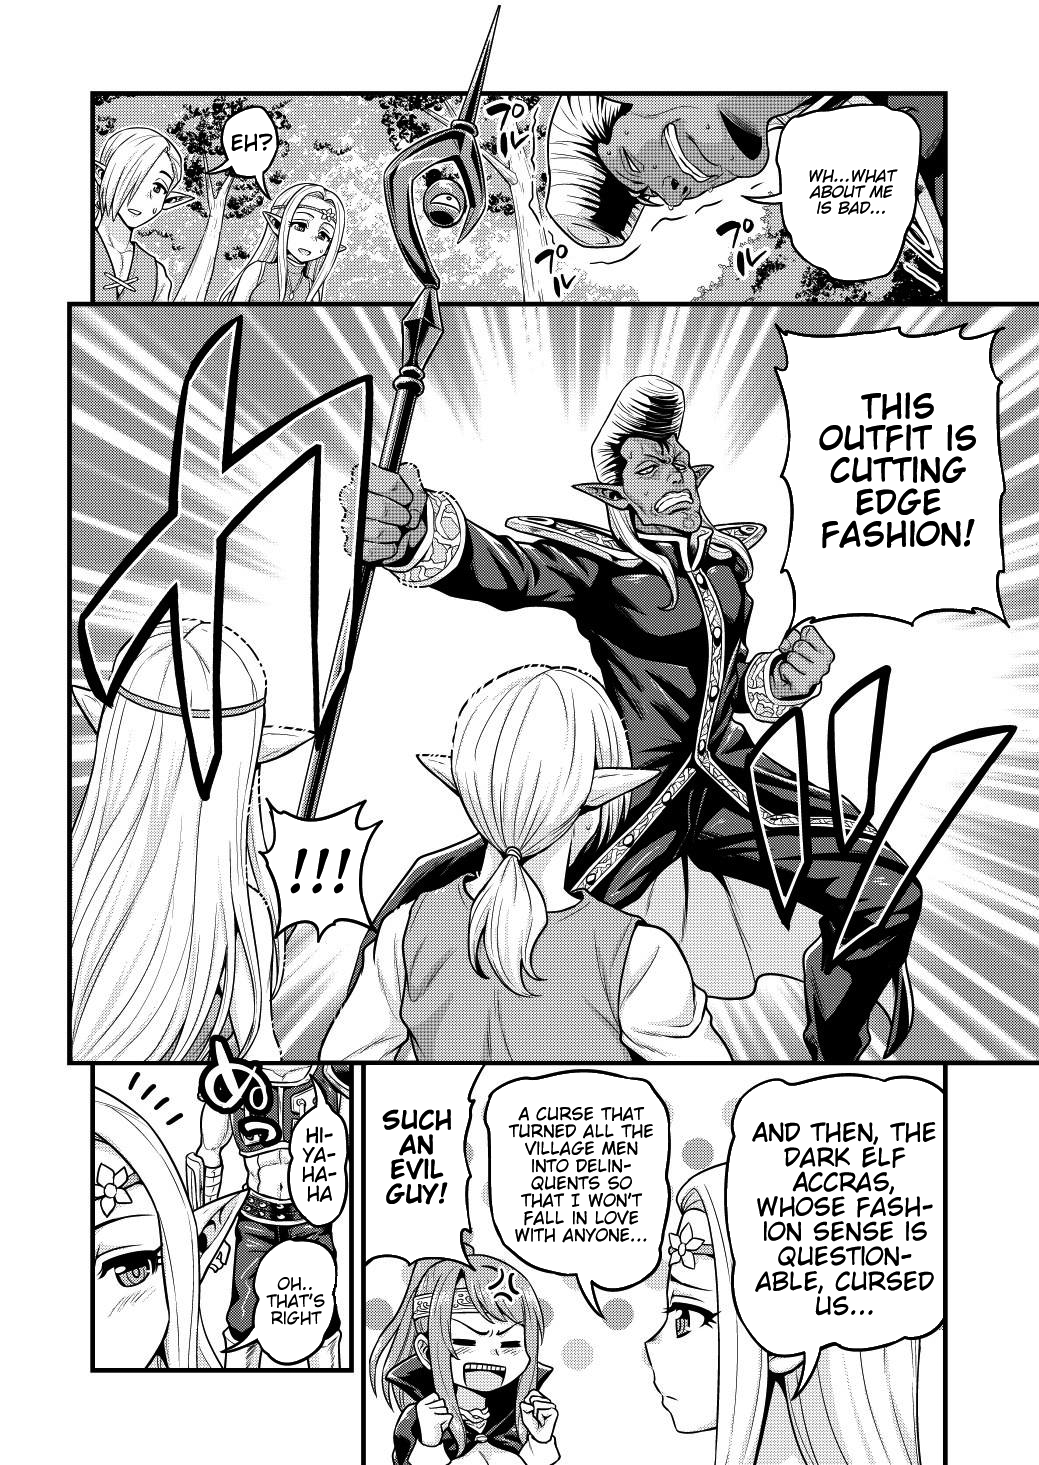 Filming Adult Videos in Another World - Chapter 3 Page 19